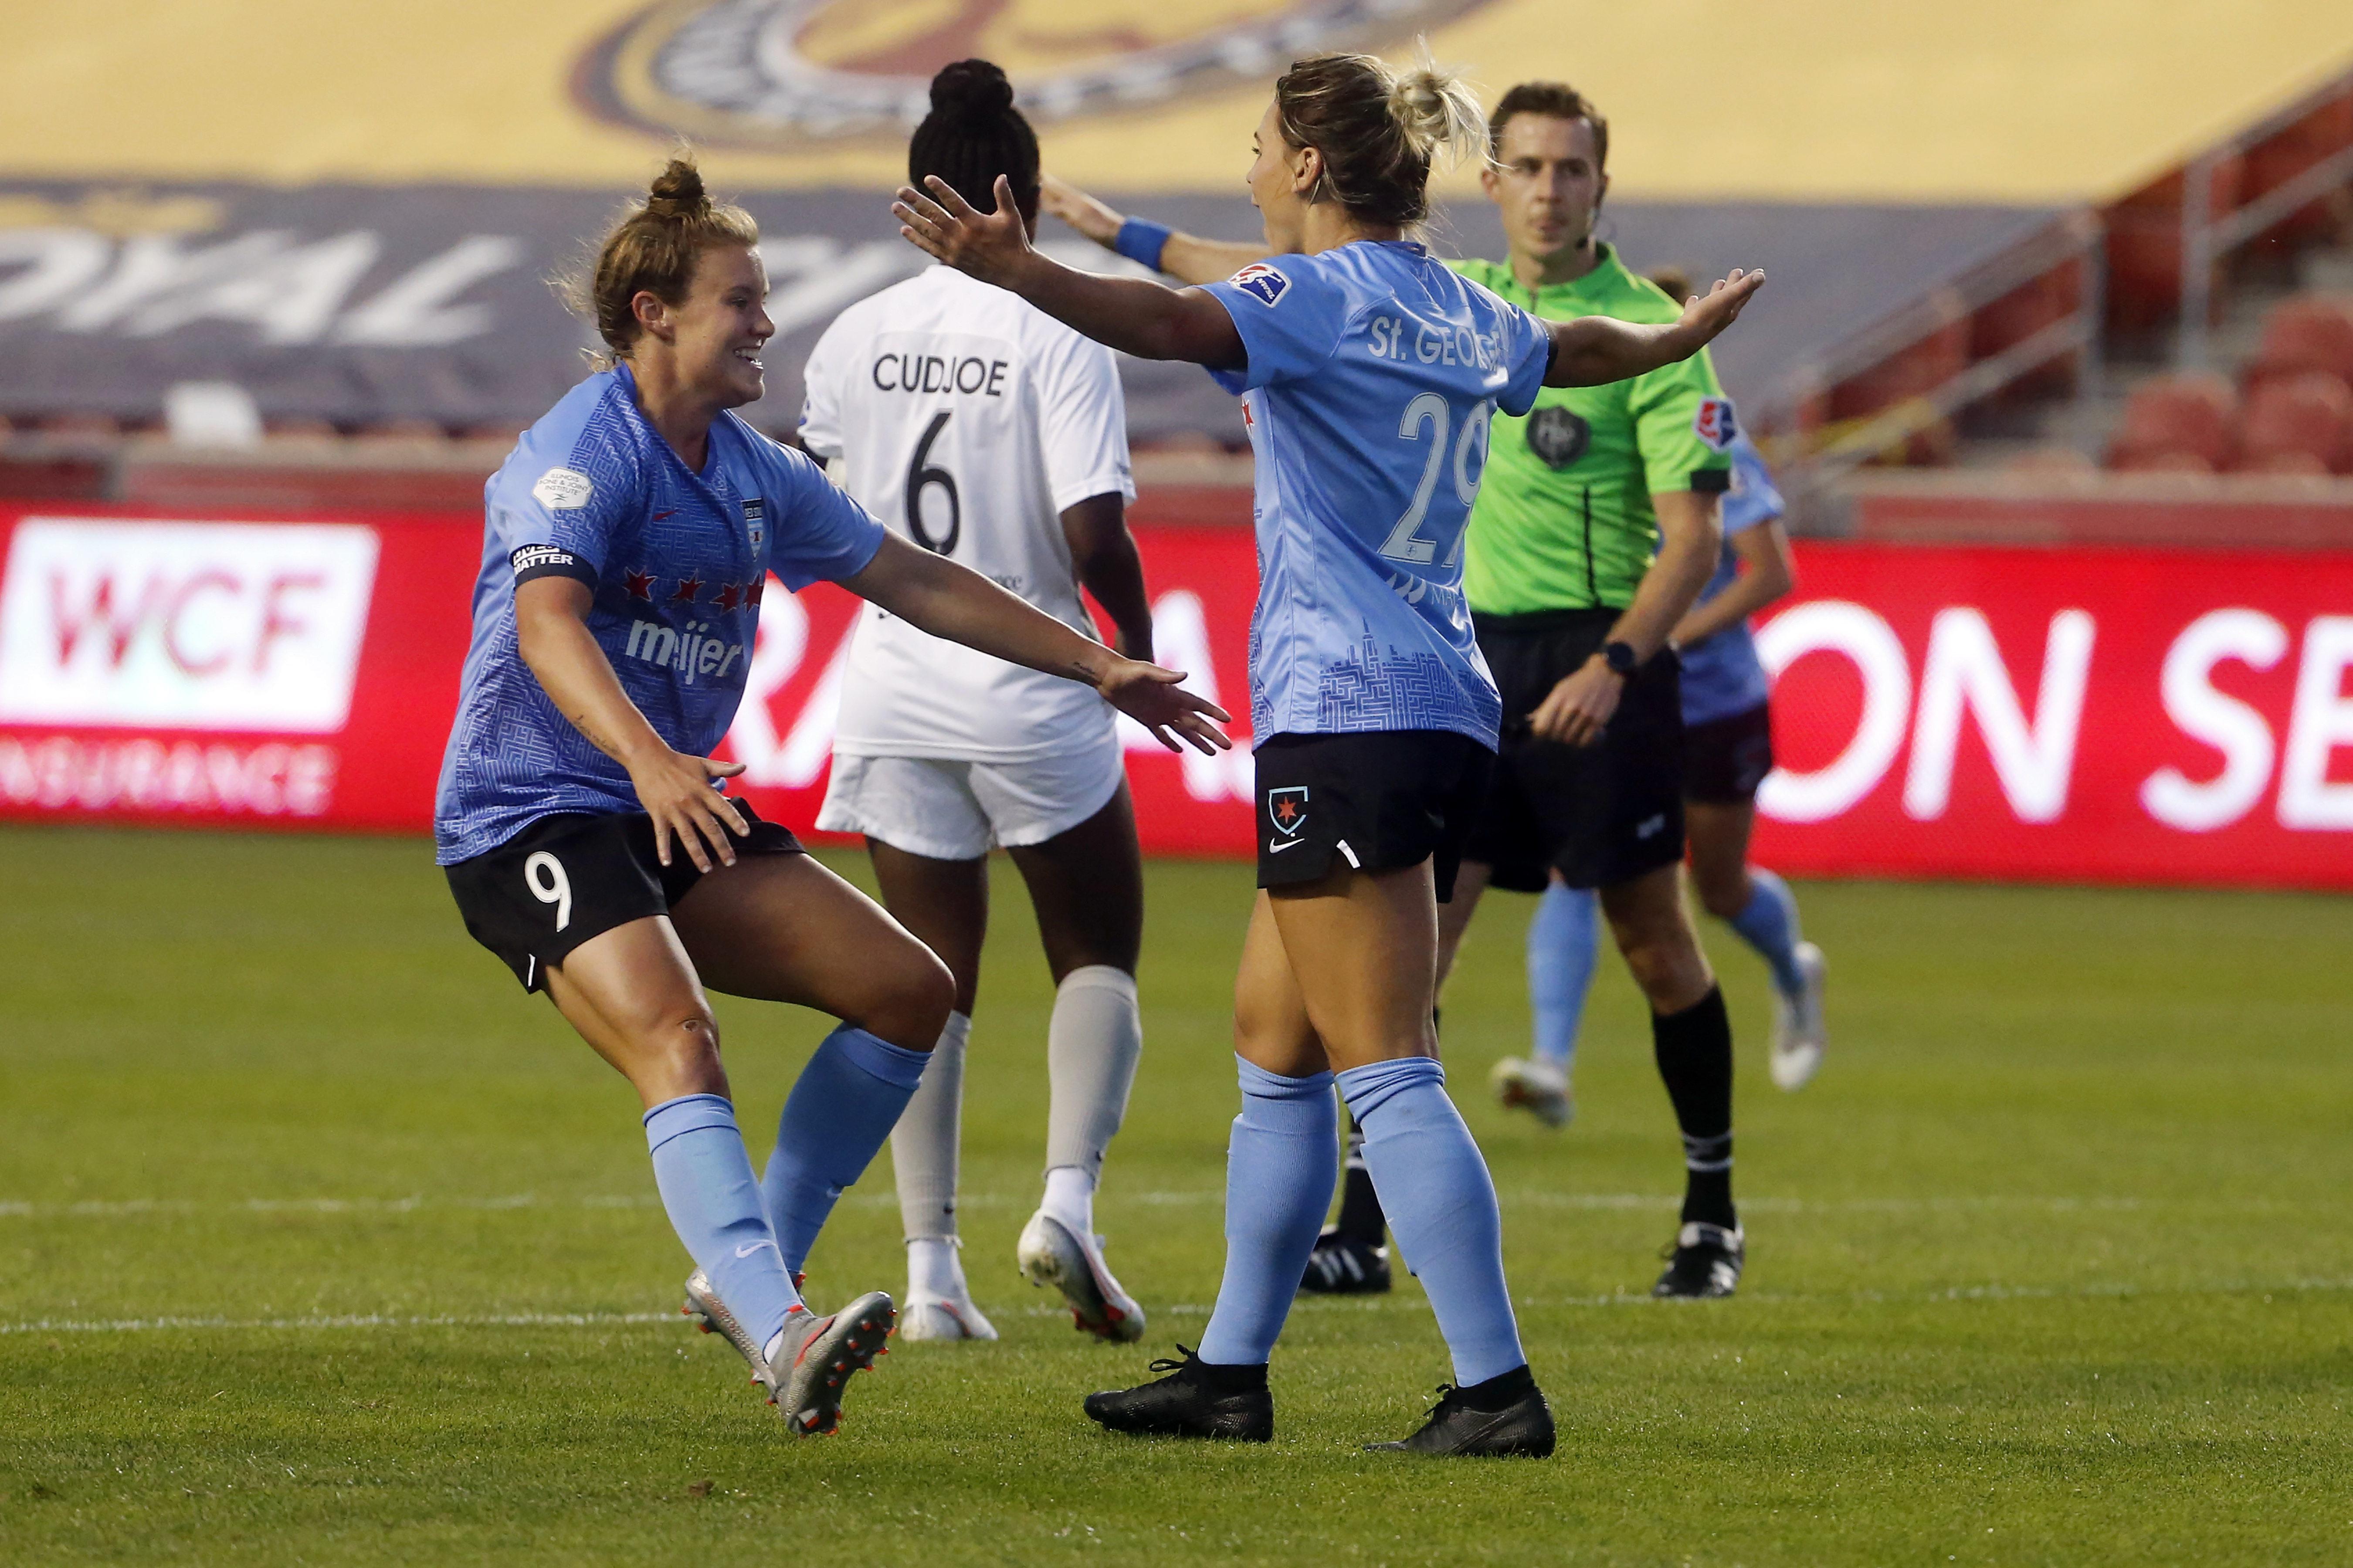 NWSL Challenge Cup final on CBS: Chicago Red Stars vs Houston Dashs